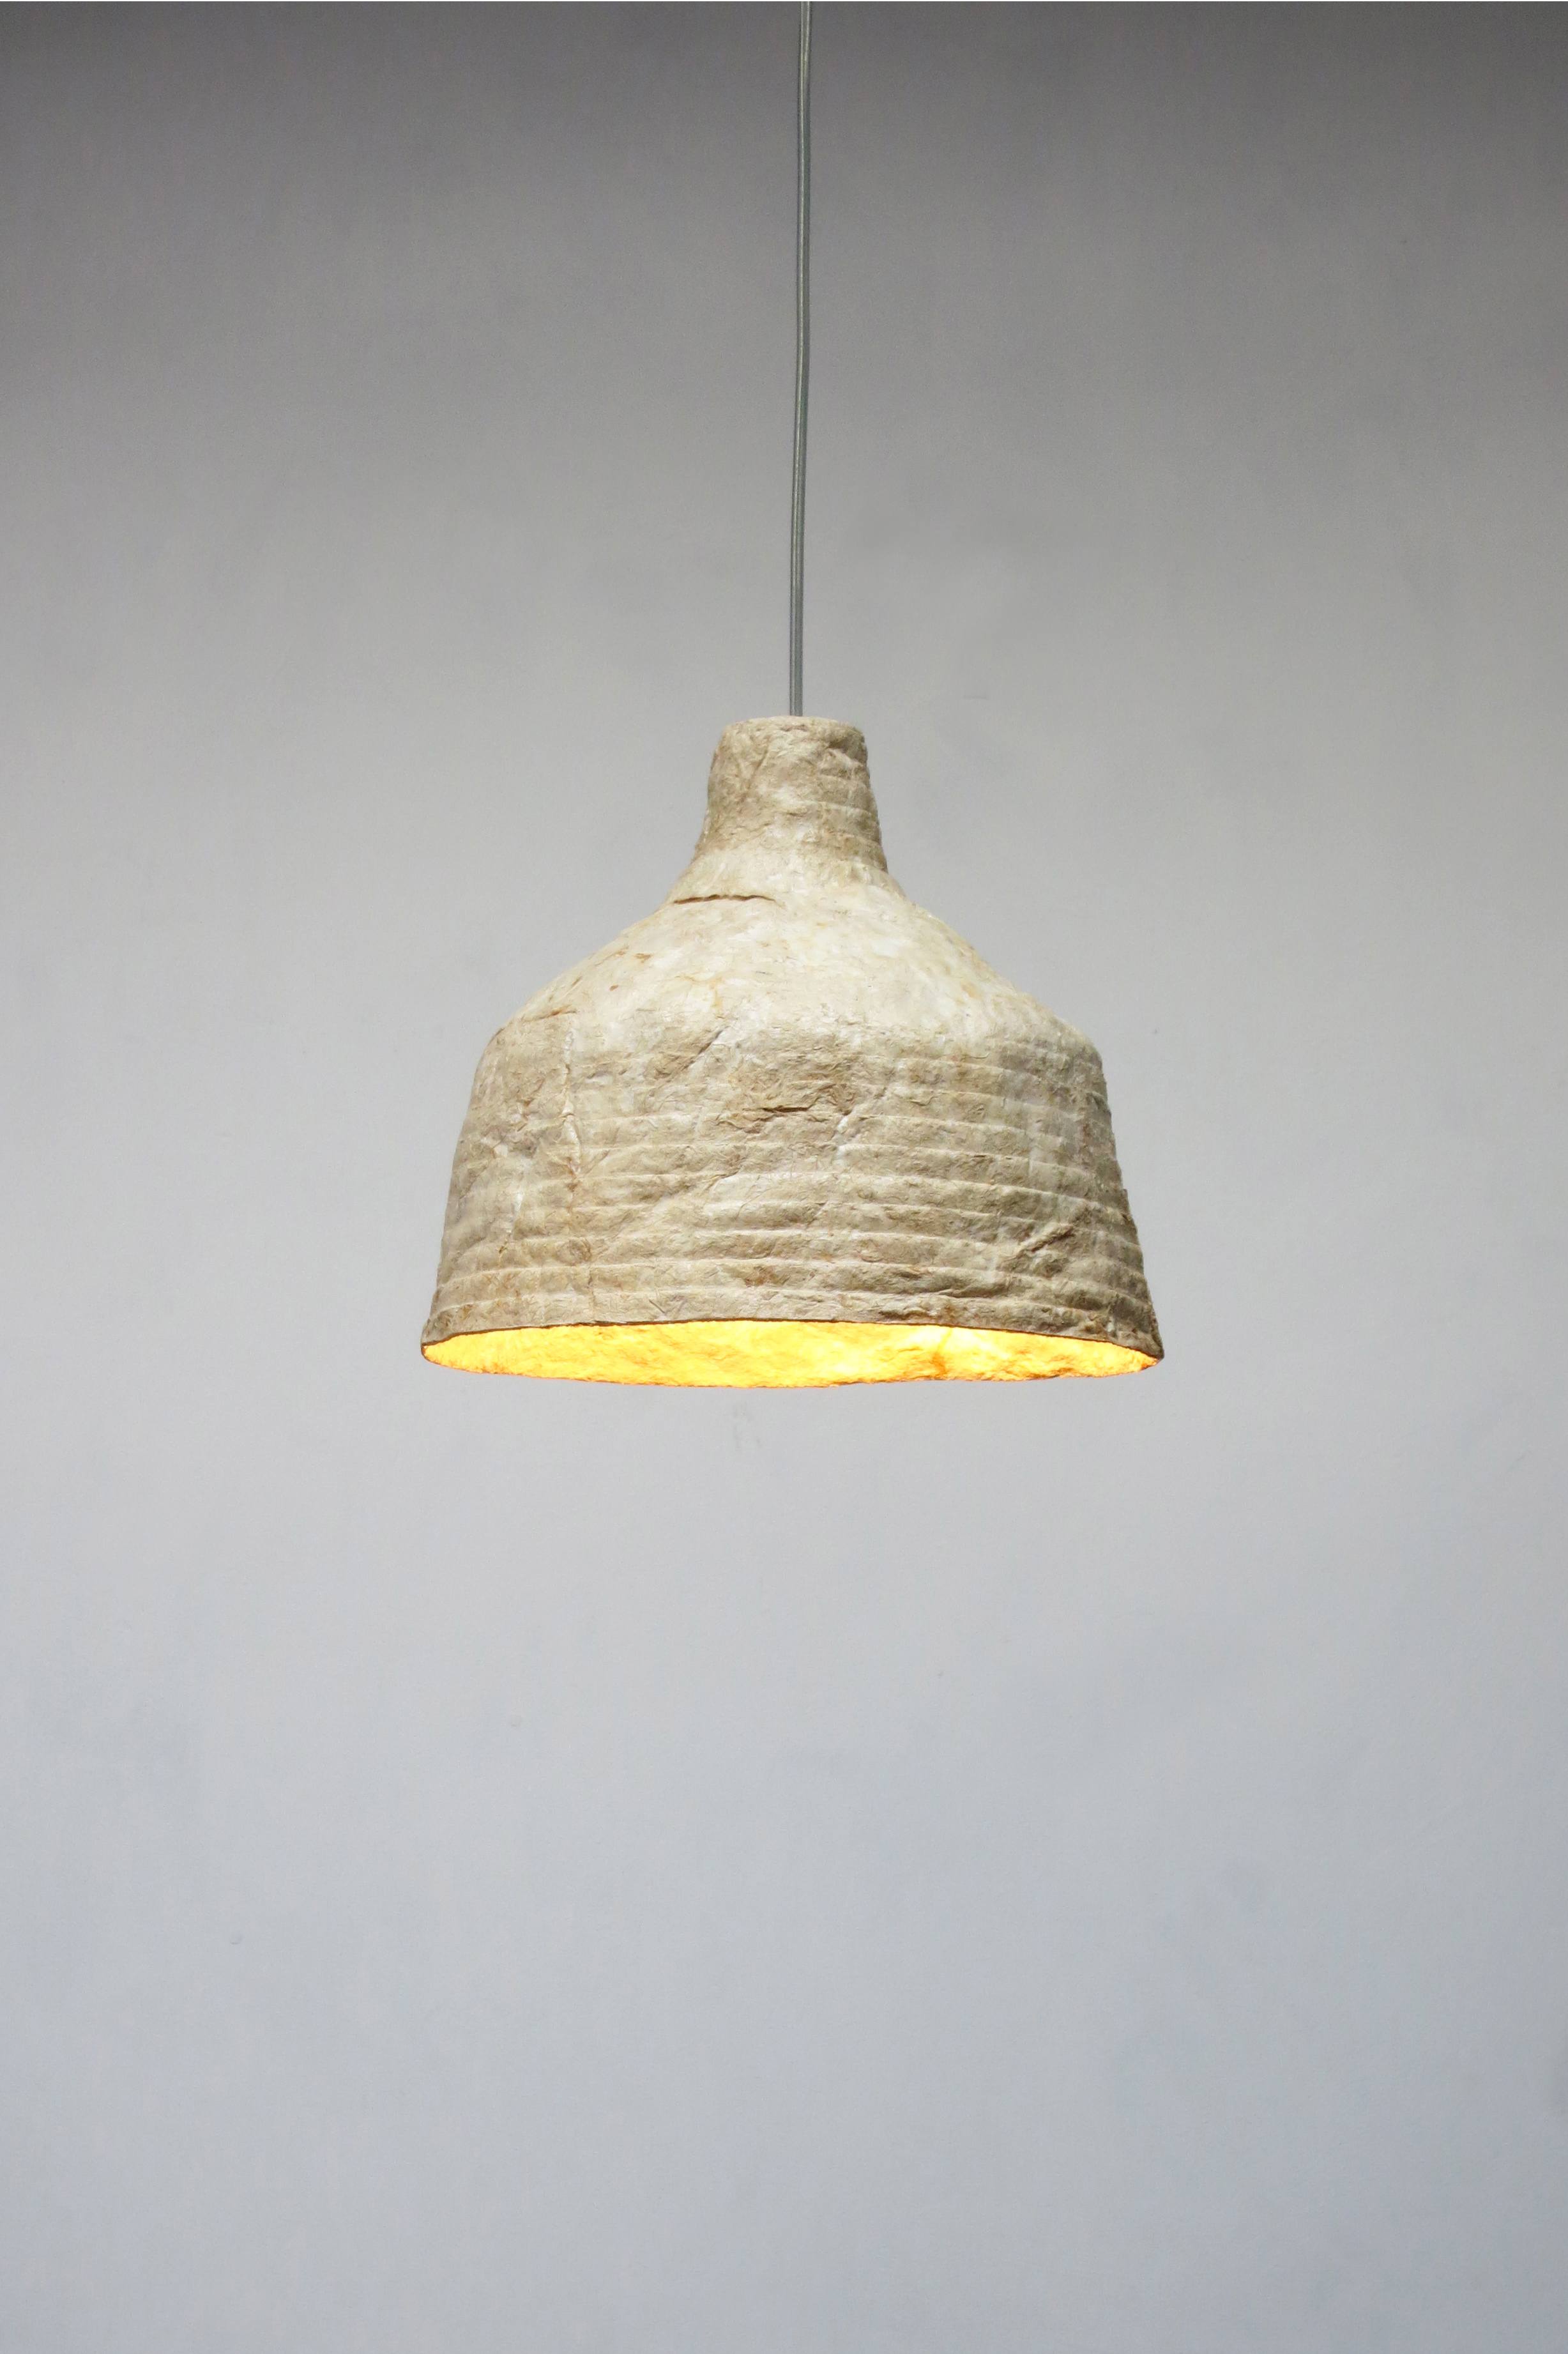 MyGlo - Mushroom Made Sustainable Lighting for Eco-friendly Spaces